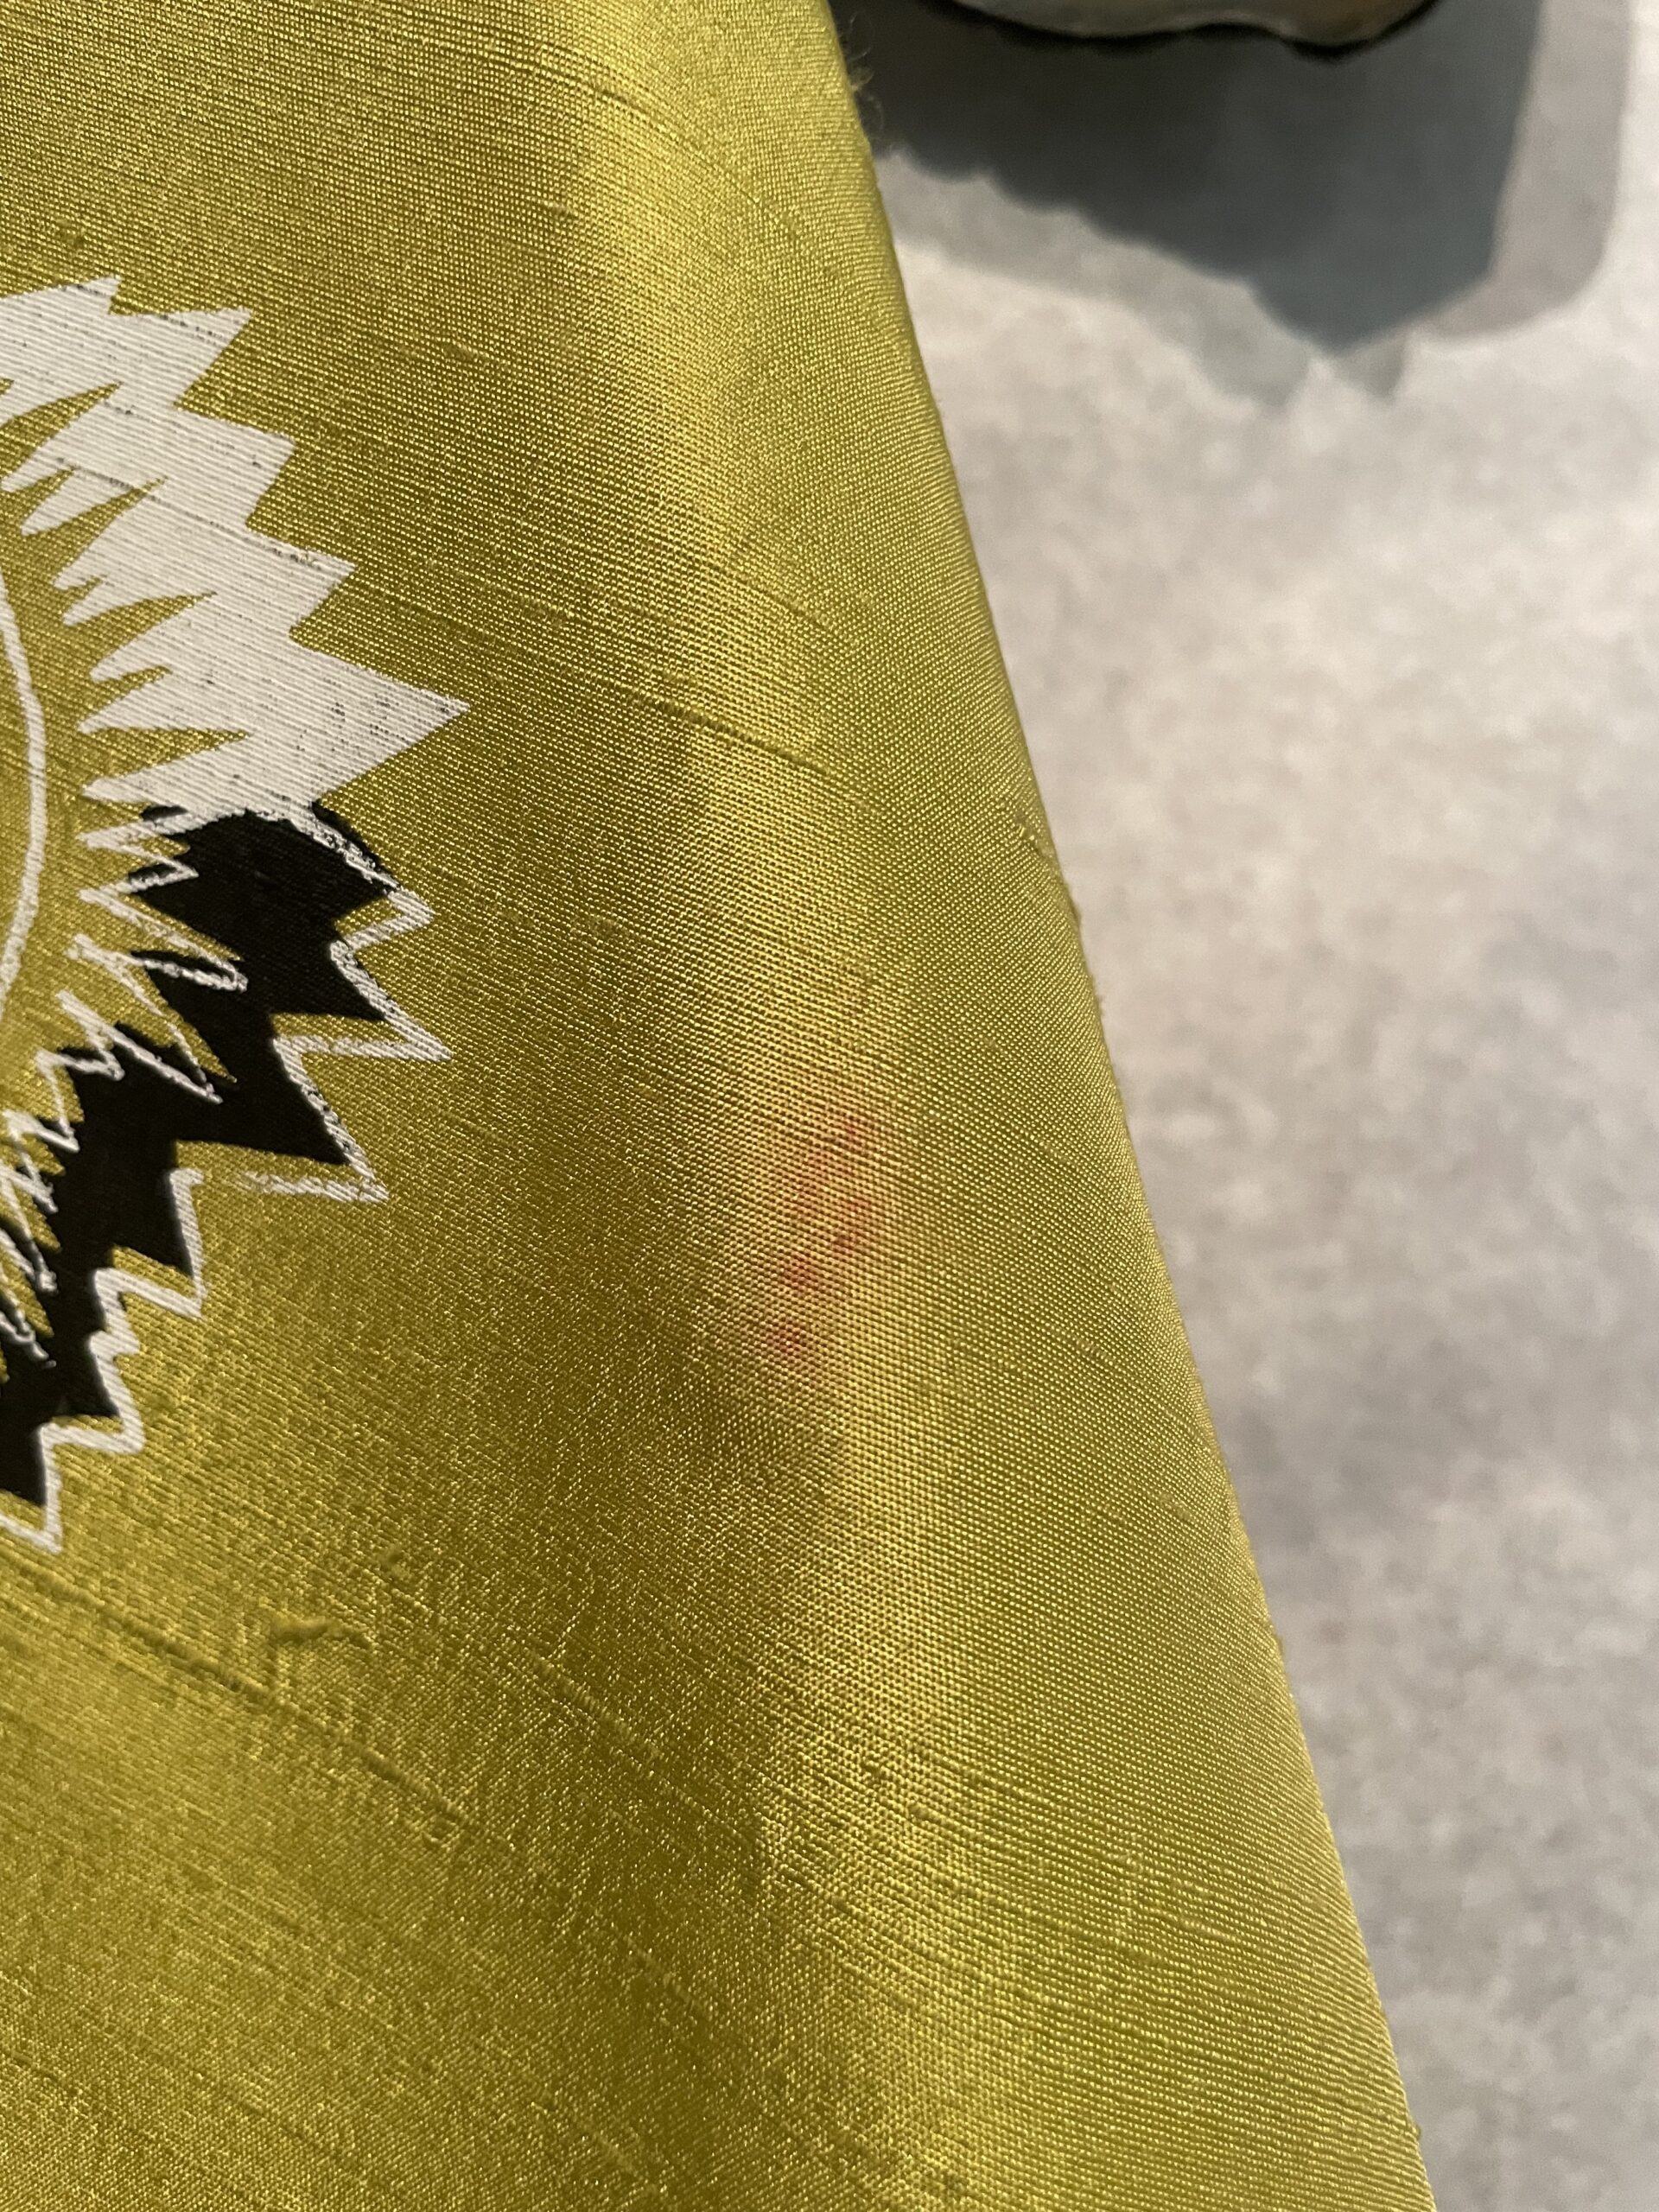 Signs of makeup on yellow fabric